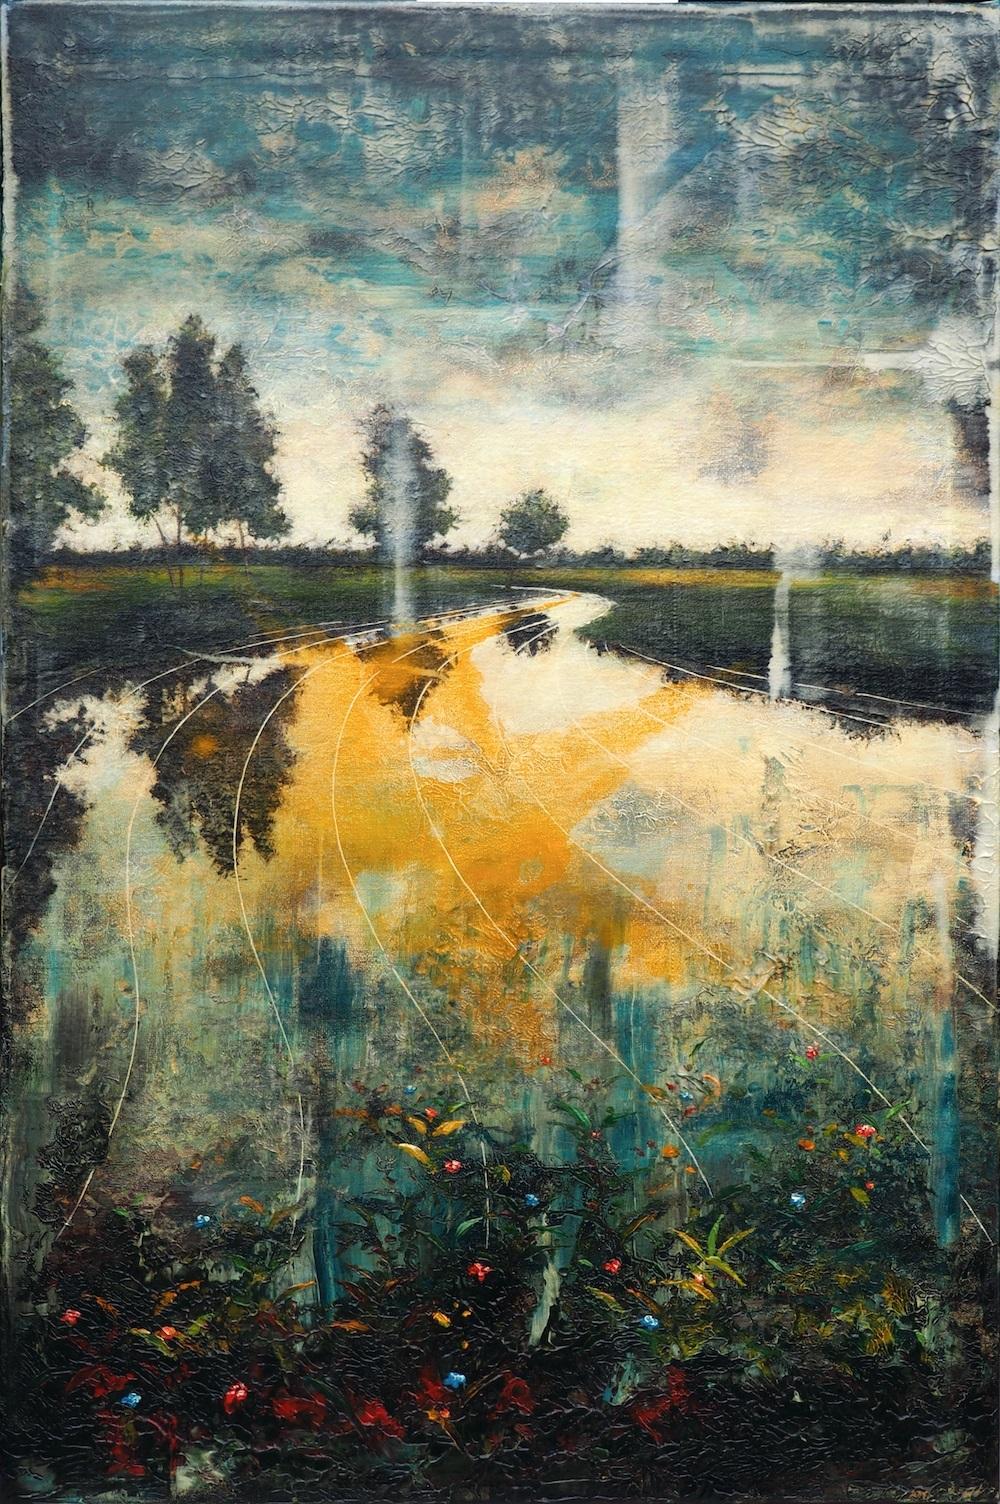 Jernej Forbici Figurative Painting - Agent Orange III Oil and Acrylic Painting on Canvas Flowers Landscape In Stock